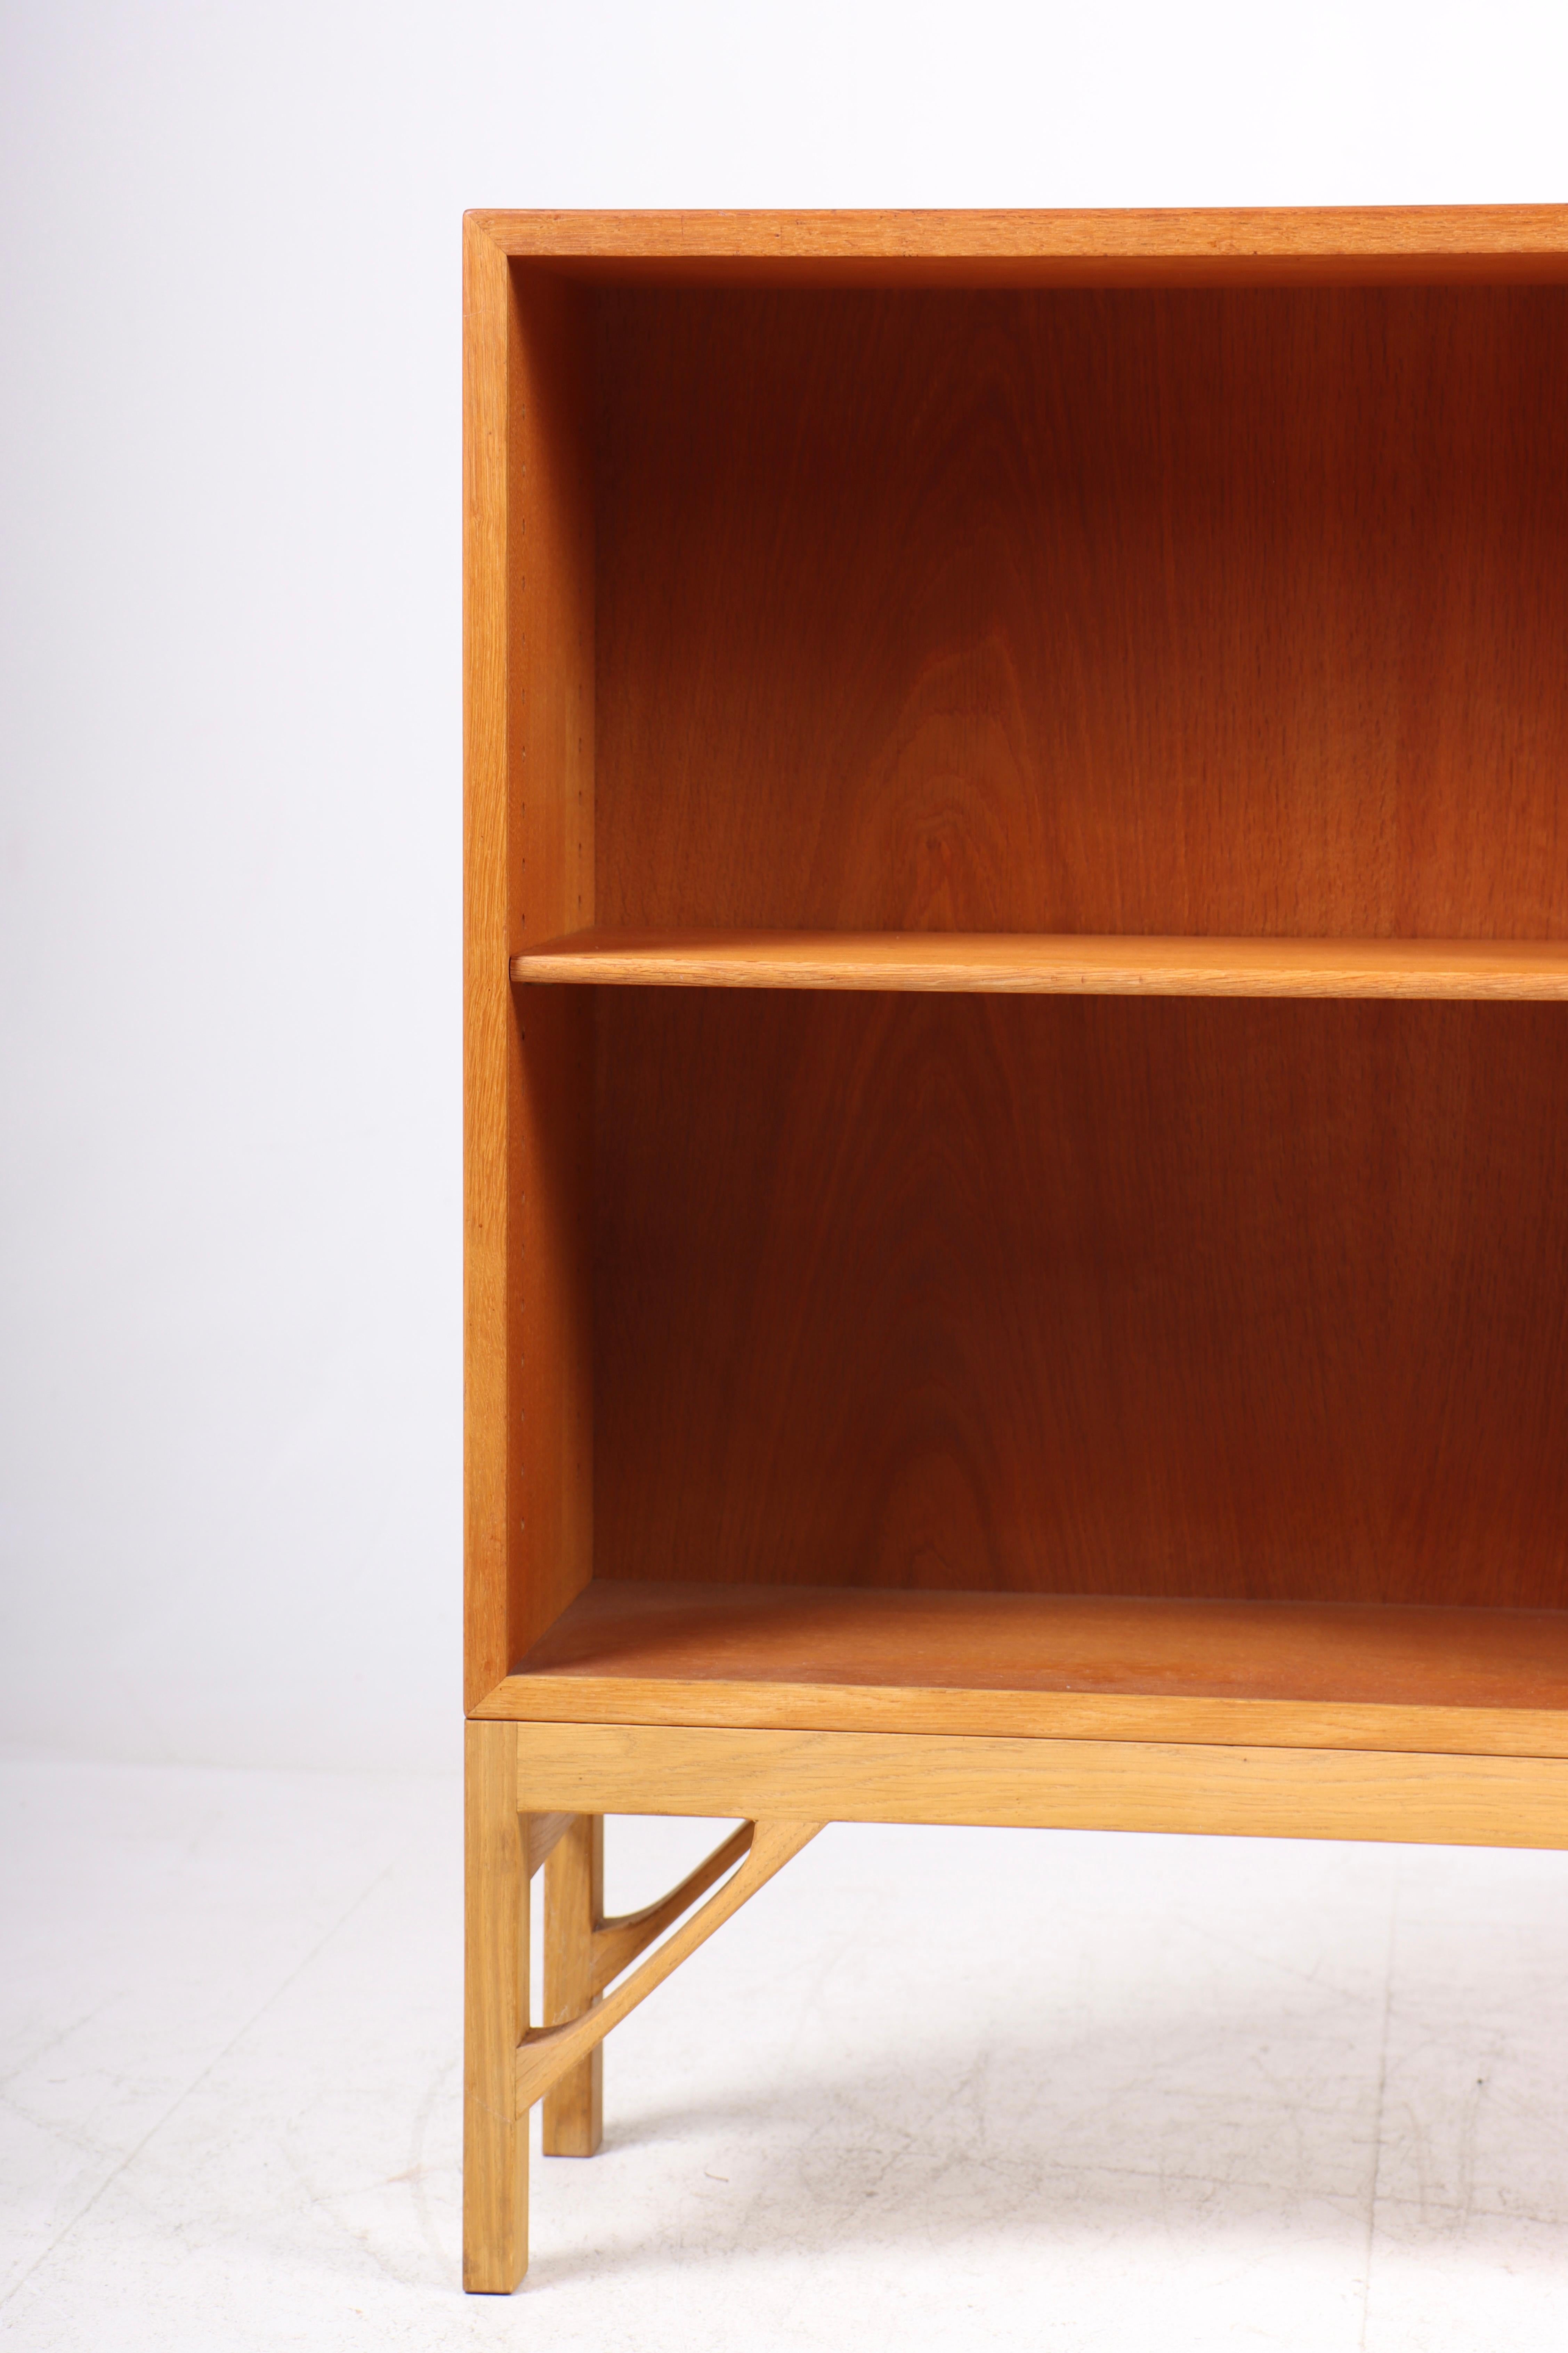 Low China bookcase in oak. Designed by MAA. Børge Mogensen in 1958, this piece is made by CM Madsen cabinetmakers Denmark in the 1960s. Great original condition. More shelves available.